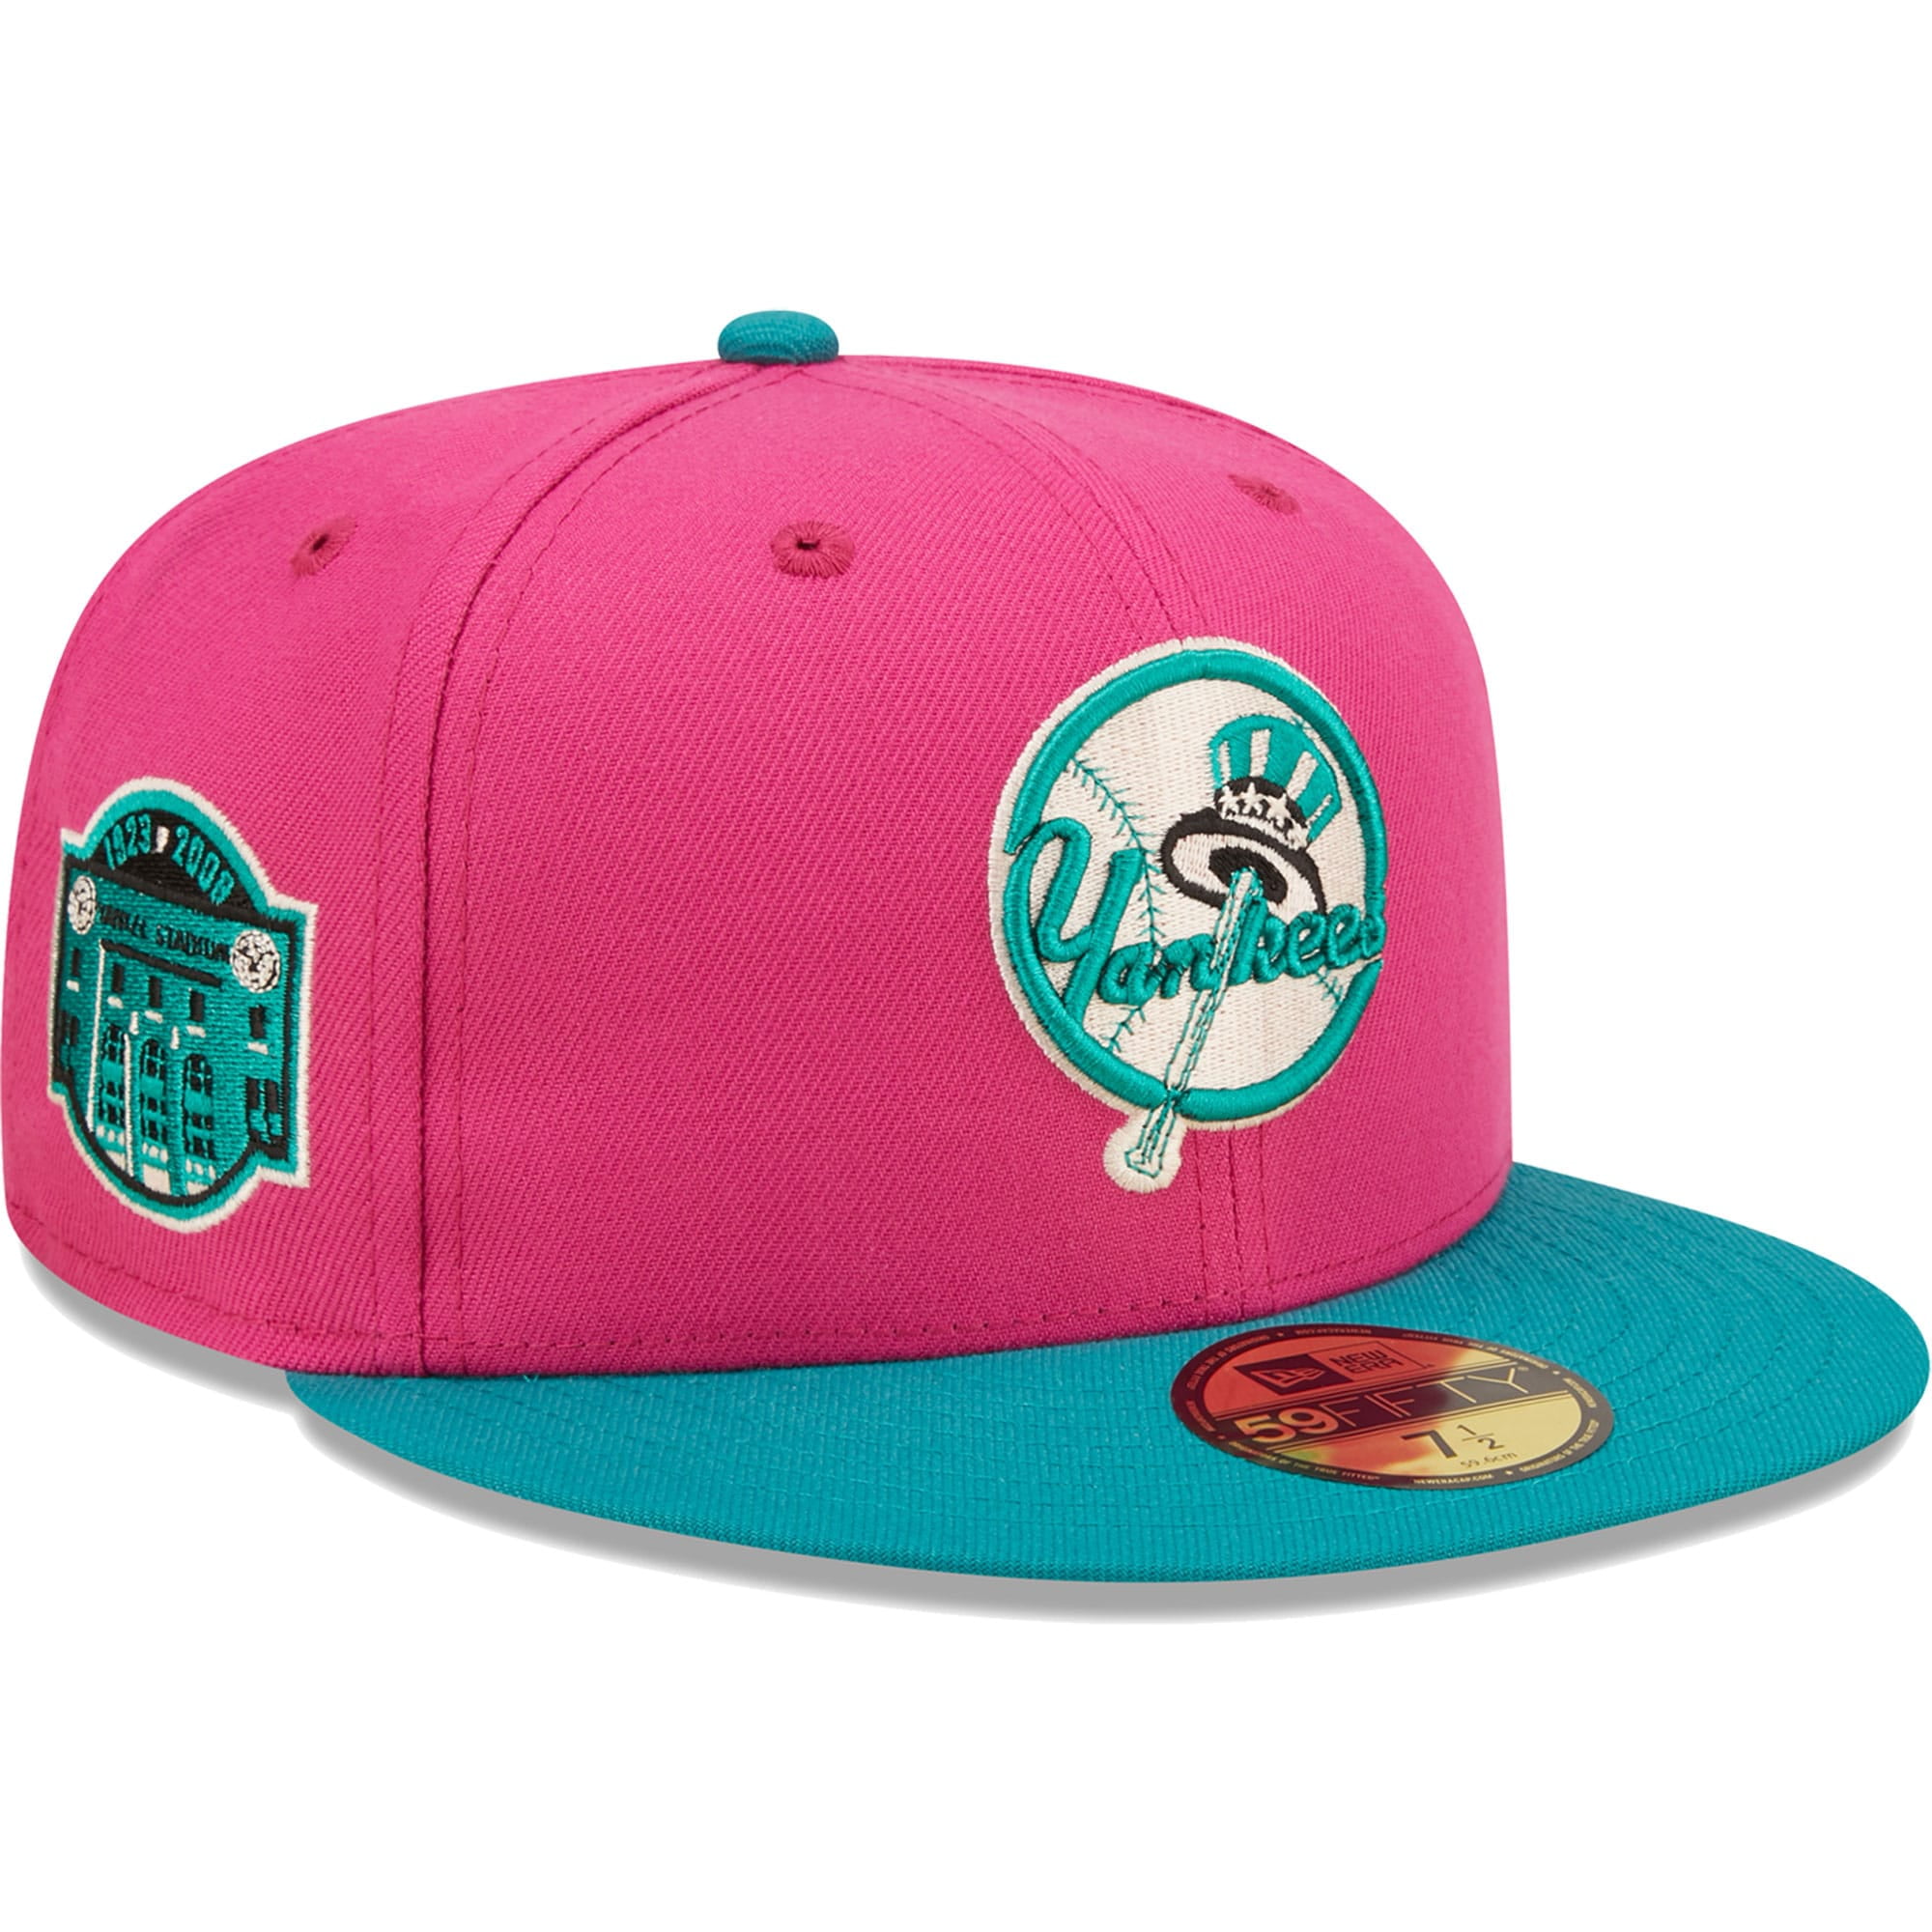 Hat Yankees Stadium Men\'s Passion Yankee Cooperstown Fitted Forest Collection Era New Pink/Green New 59FIFTY York